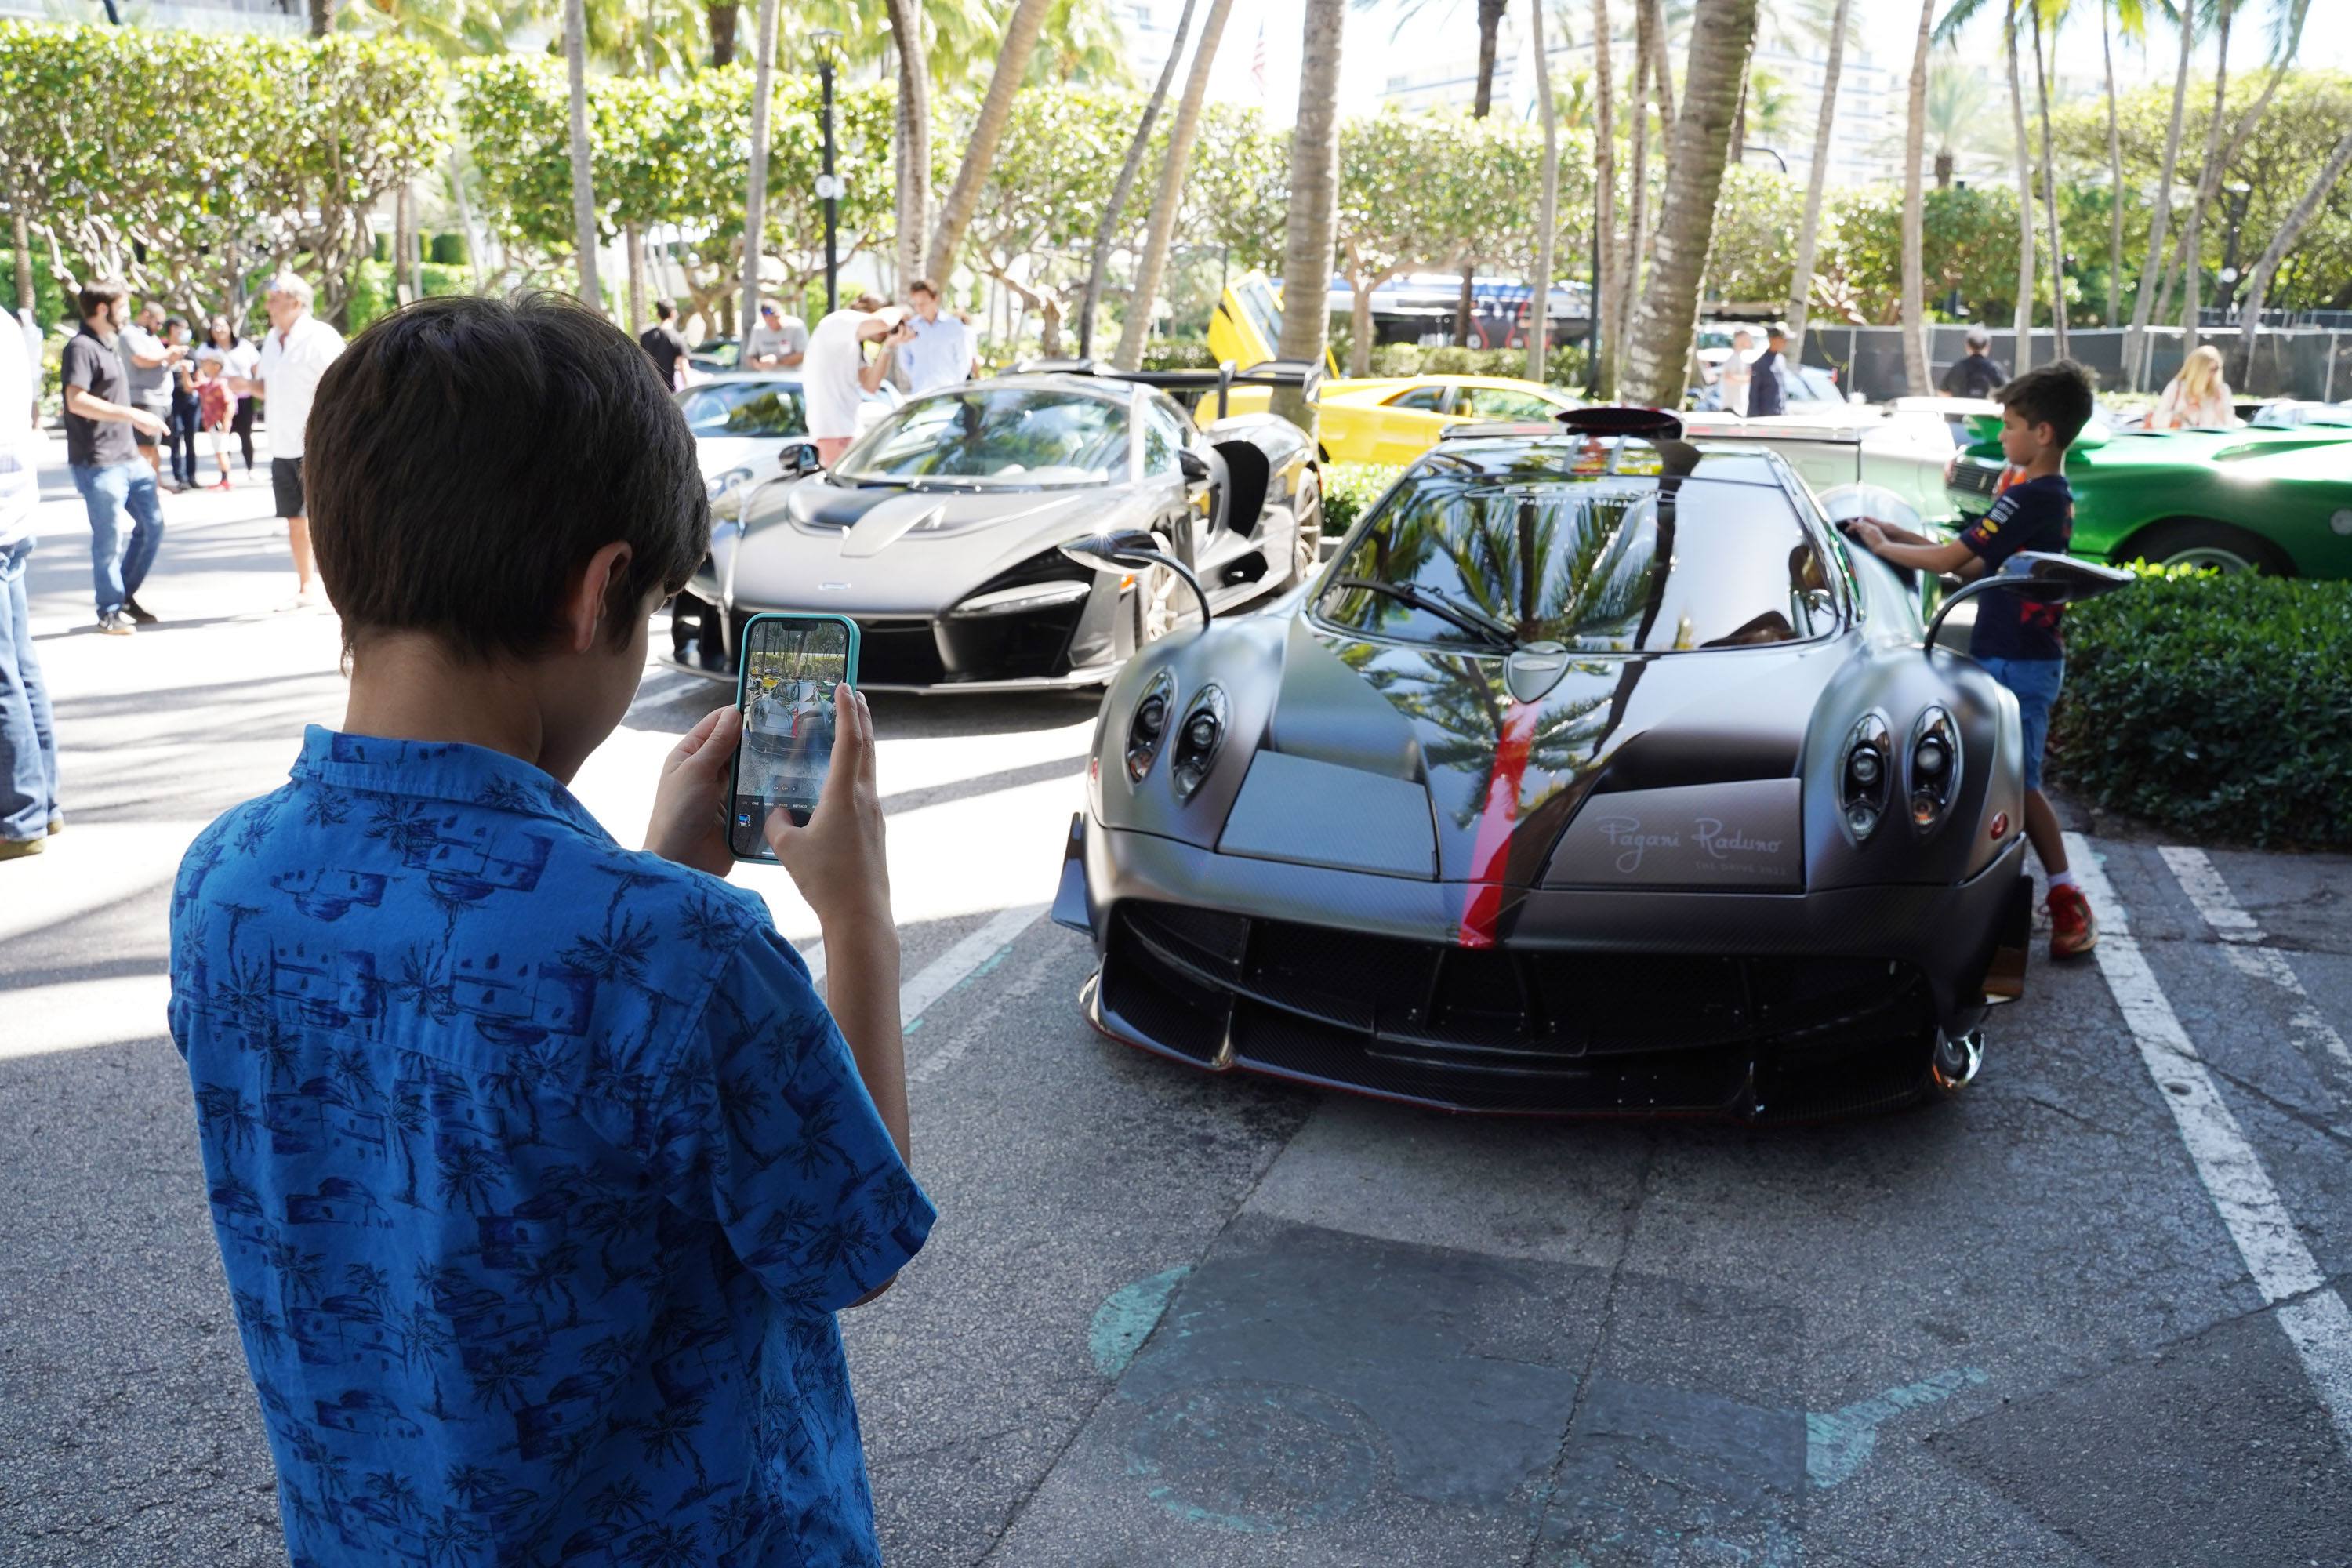 A variety of images showcasing the Collector’s Car Show hosted by Bal Harbour Shops during Bespoke Bal Harbour. Images include guests in attendance, rare and exotic cars showcased at the event, and watched from Richard Mille.